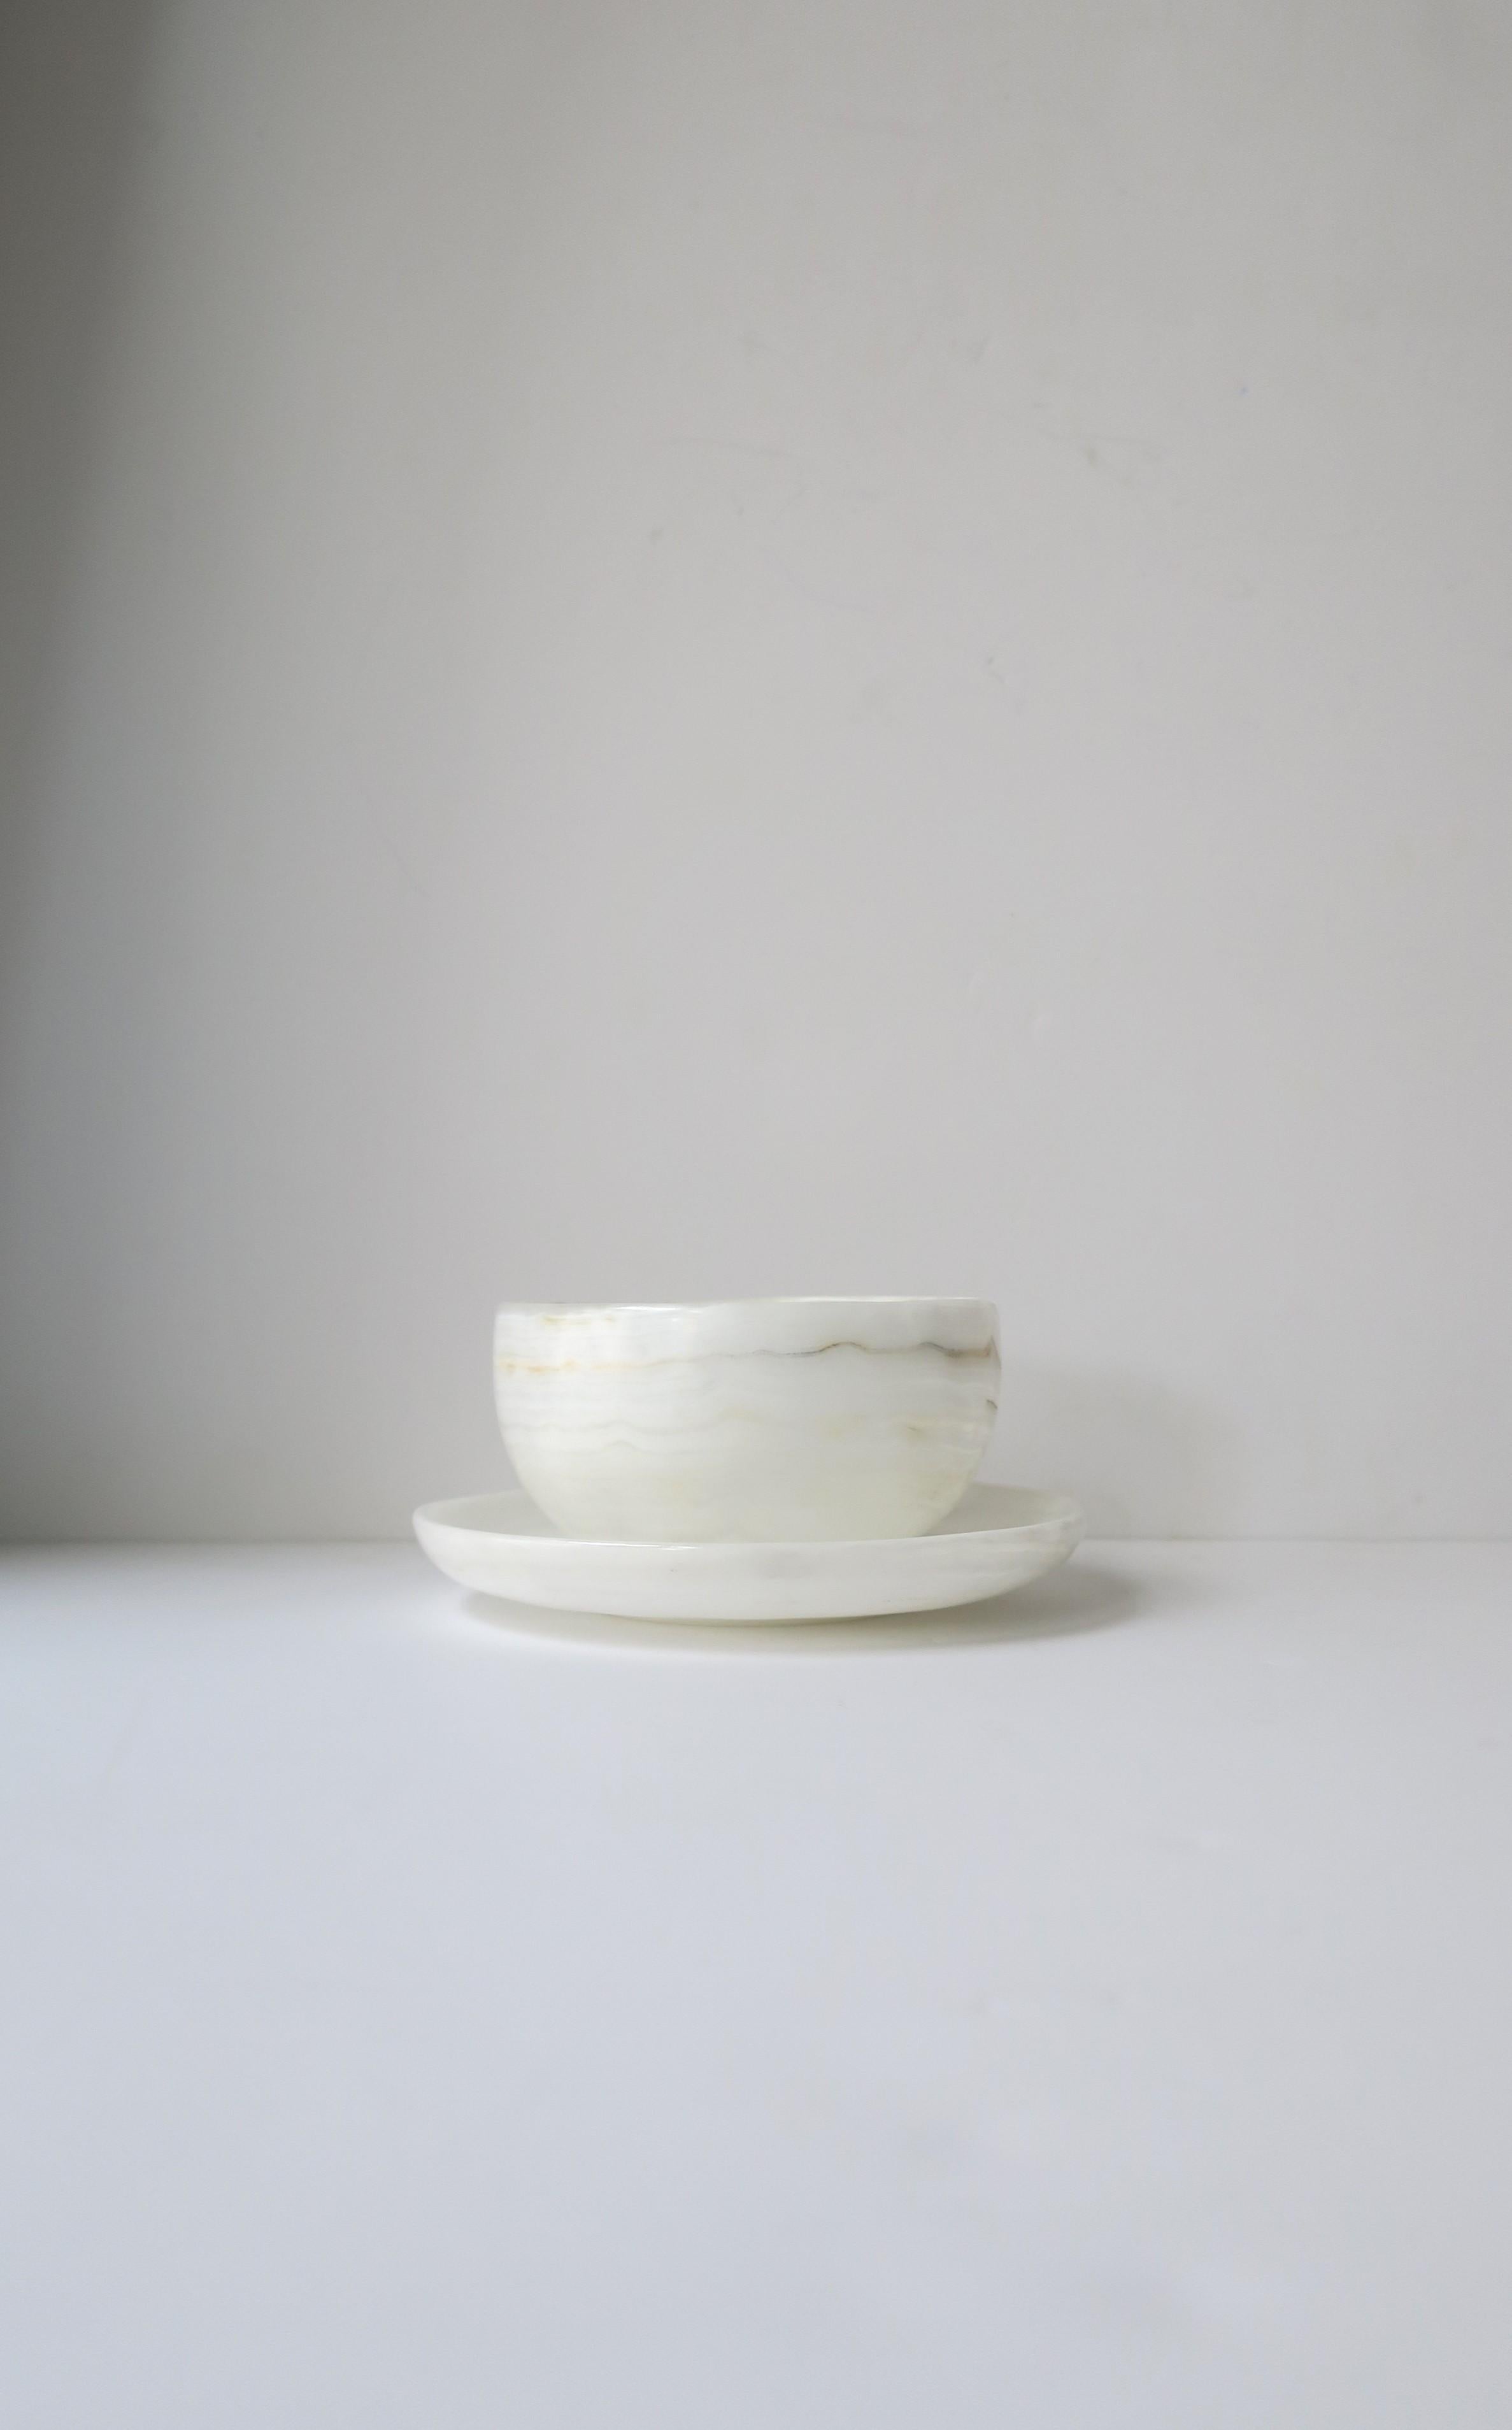 A beautiful white onyx marble bowl and saucer set in the minimalist style, circa 21st century. Onyx marble is predominantly white with traces of neutral tones as shown in images. Great as a standalone piece, to enjoy every day, or for entertaining